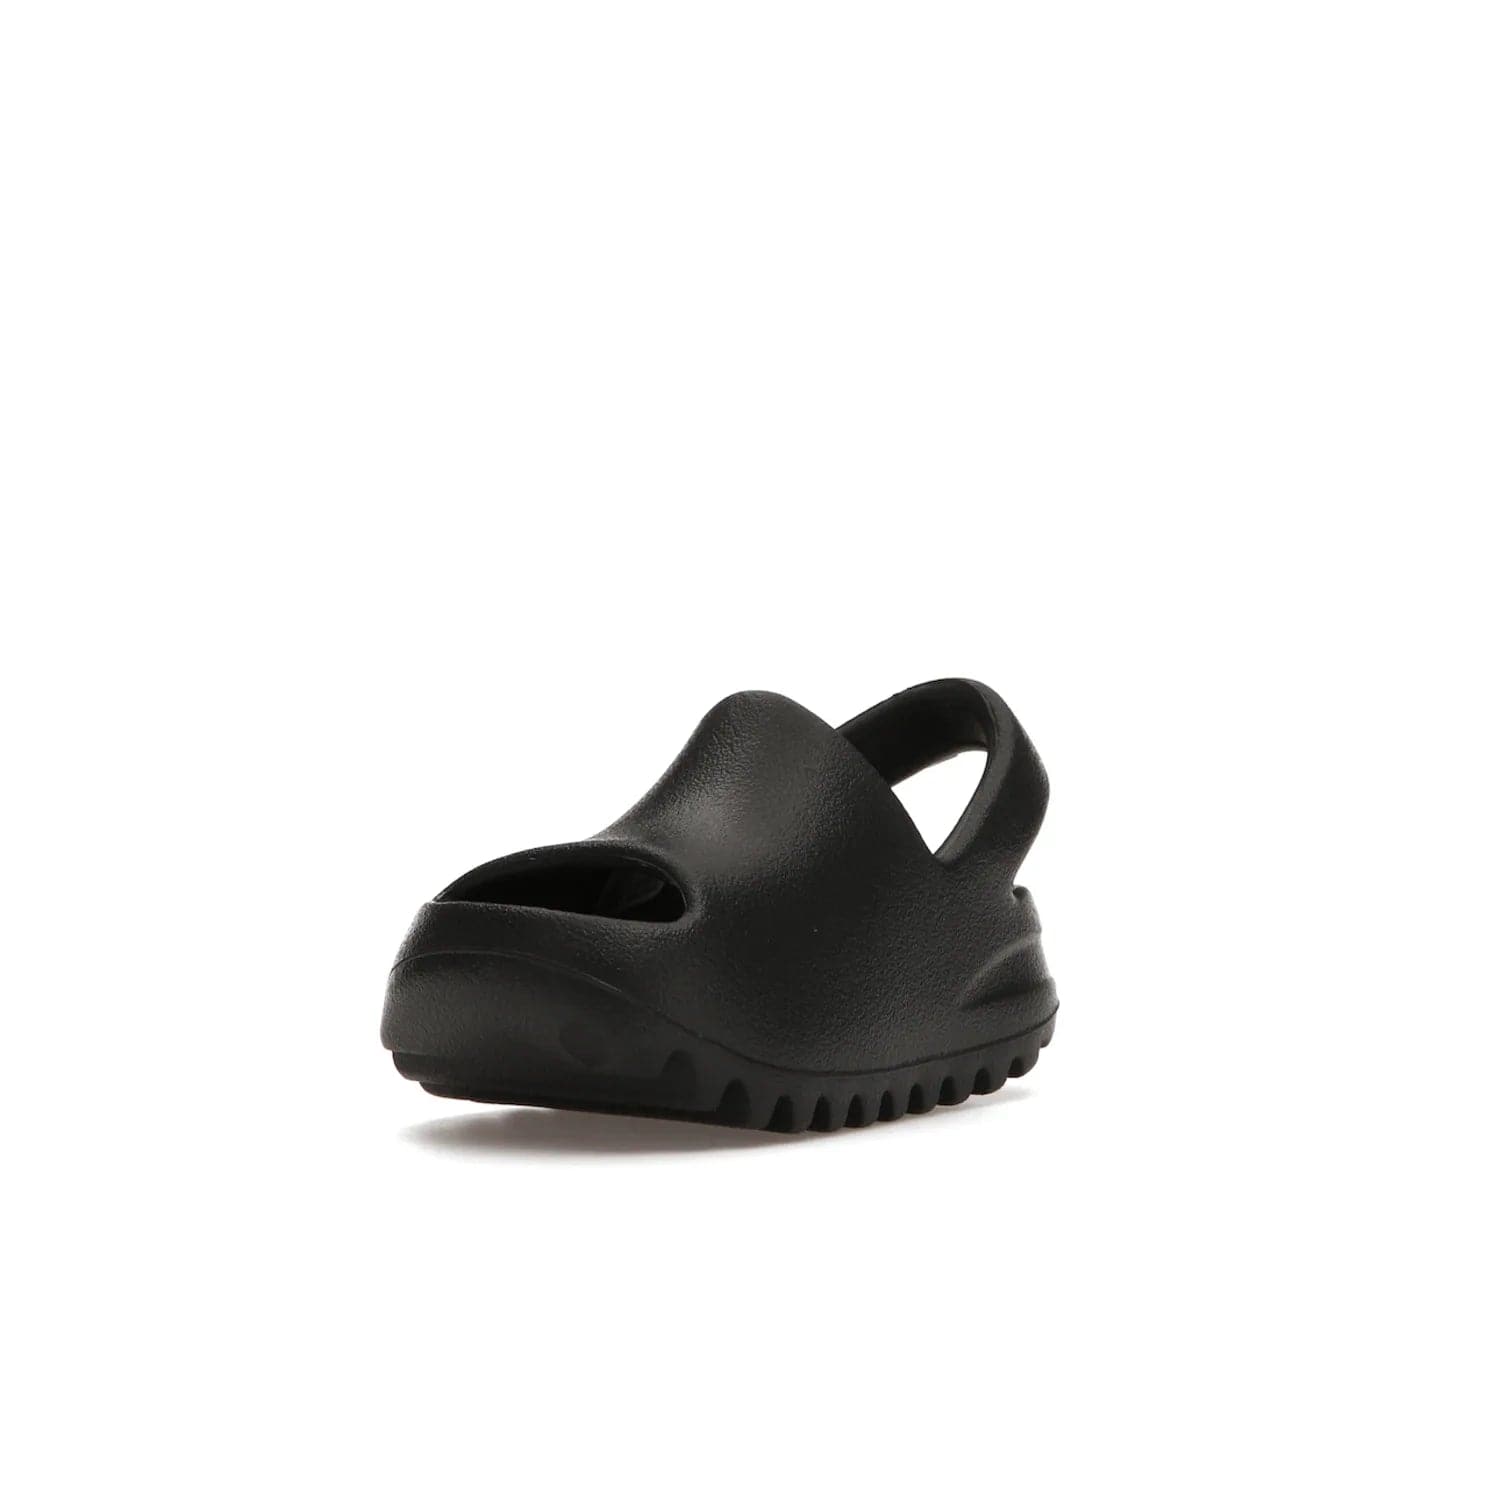 adidas Yeezy Slide Onyx (Infants) - Image 14 - Only at www.BallersClubKickz.com - The Adidas Yeezy Slide Onyx (Infant) is a classic silhouette with unique features and durable EVA foam. Released in May 2021 with a starting price of $70, it's no wonder it quickly gained popularity with its cool, minimalist look.